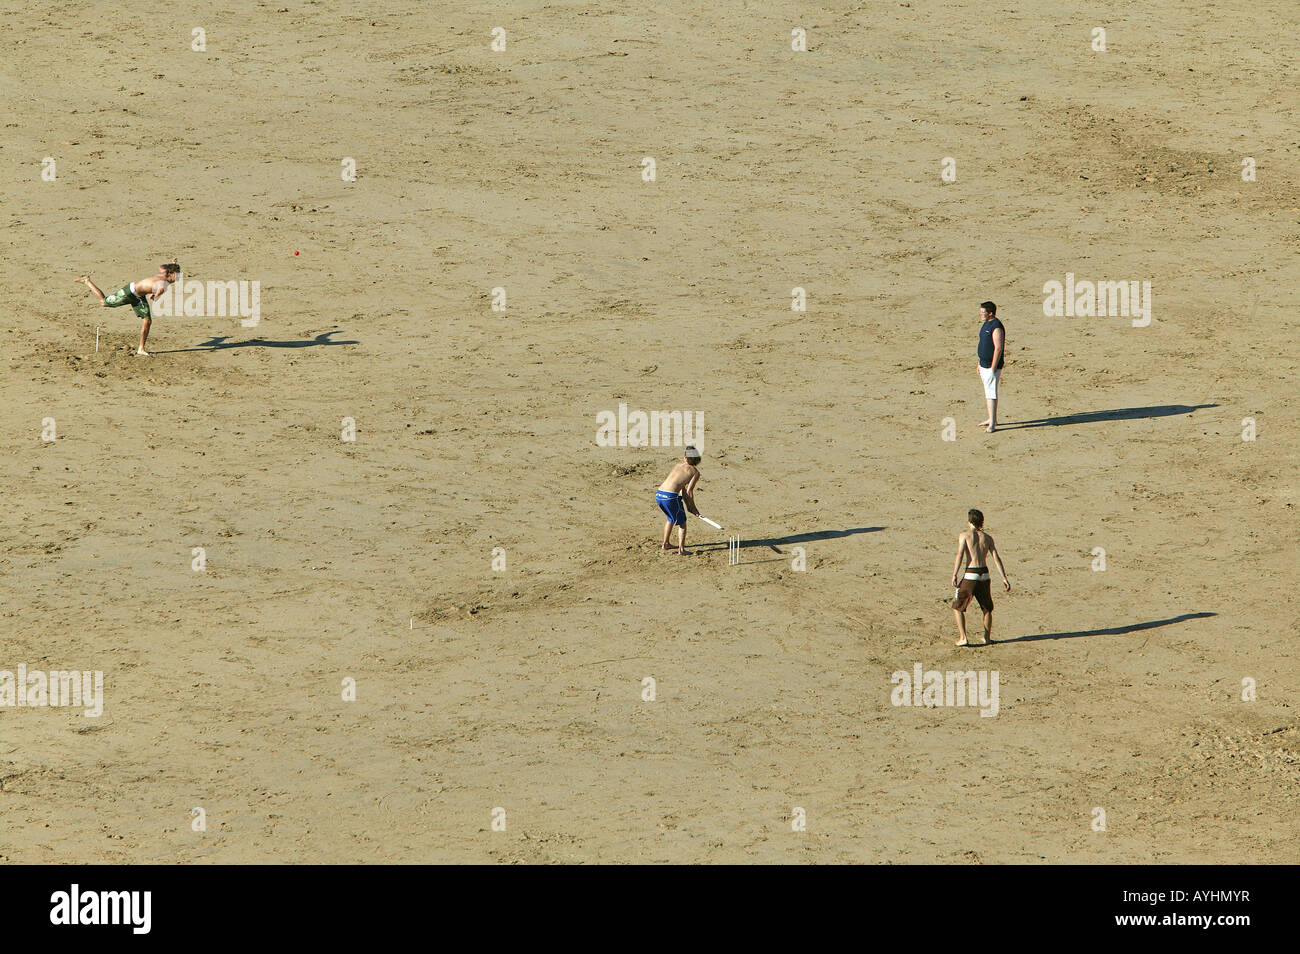 Young Men playing a game of Beach Cricket Stock Photo